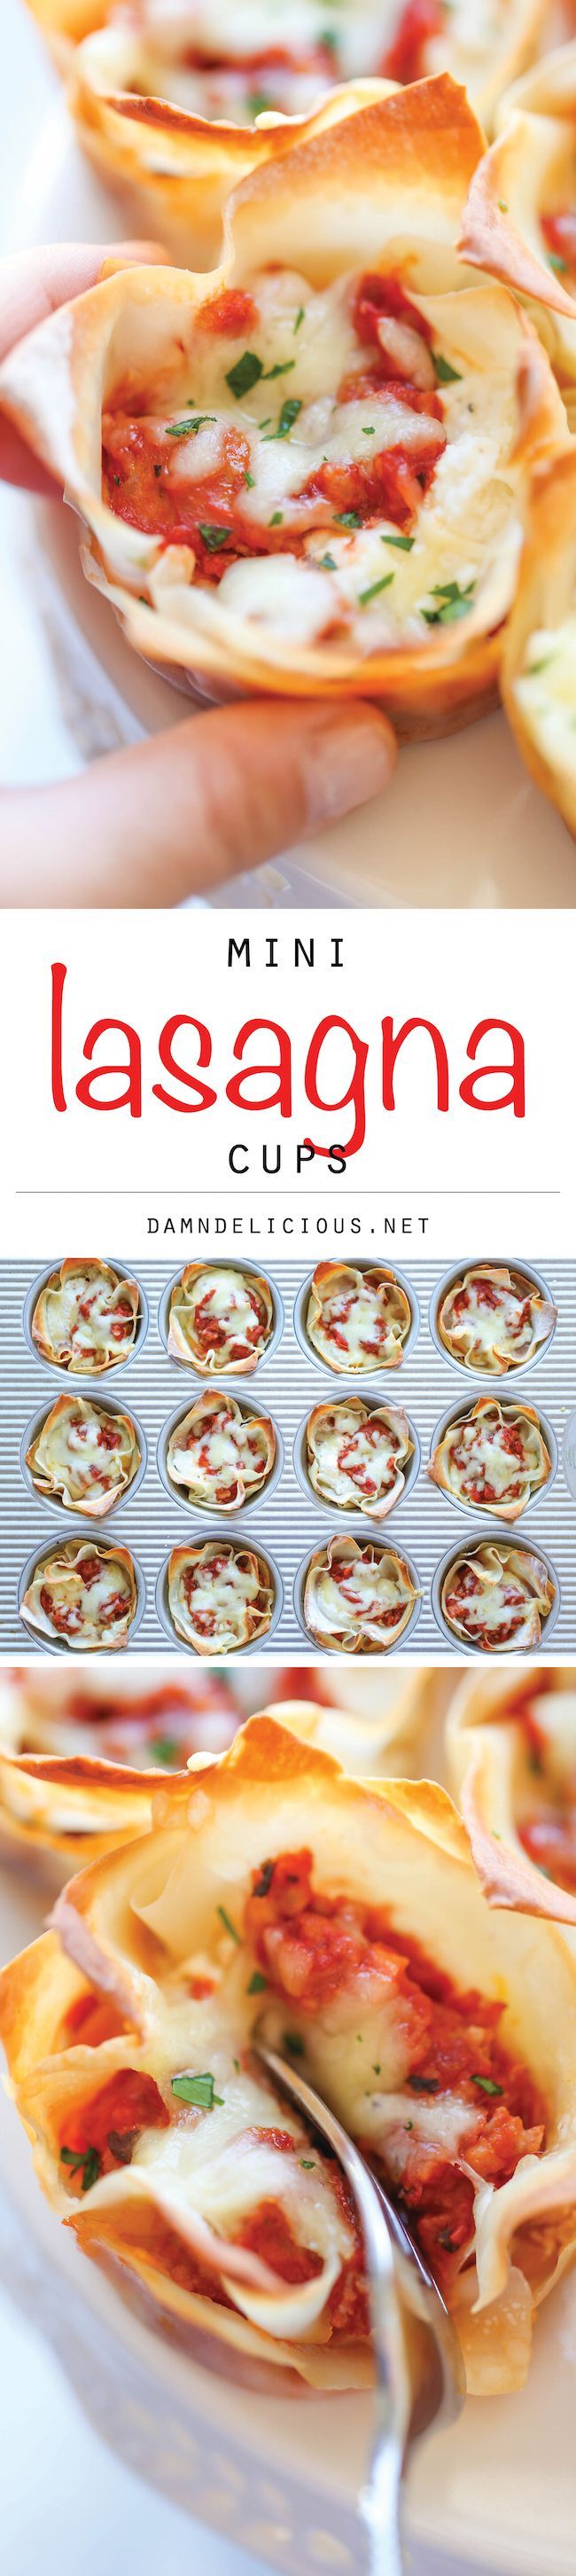 Mini Lasagna Cups – The easiest, simplest lasagna you will ever make, conveniently made into single-serving portions!